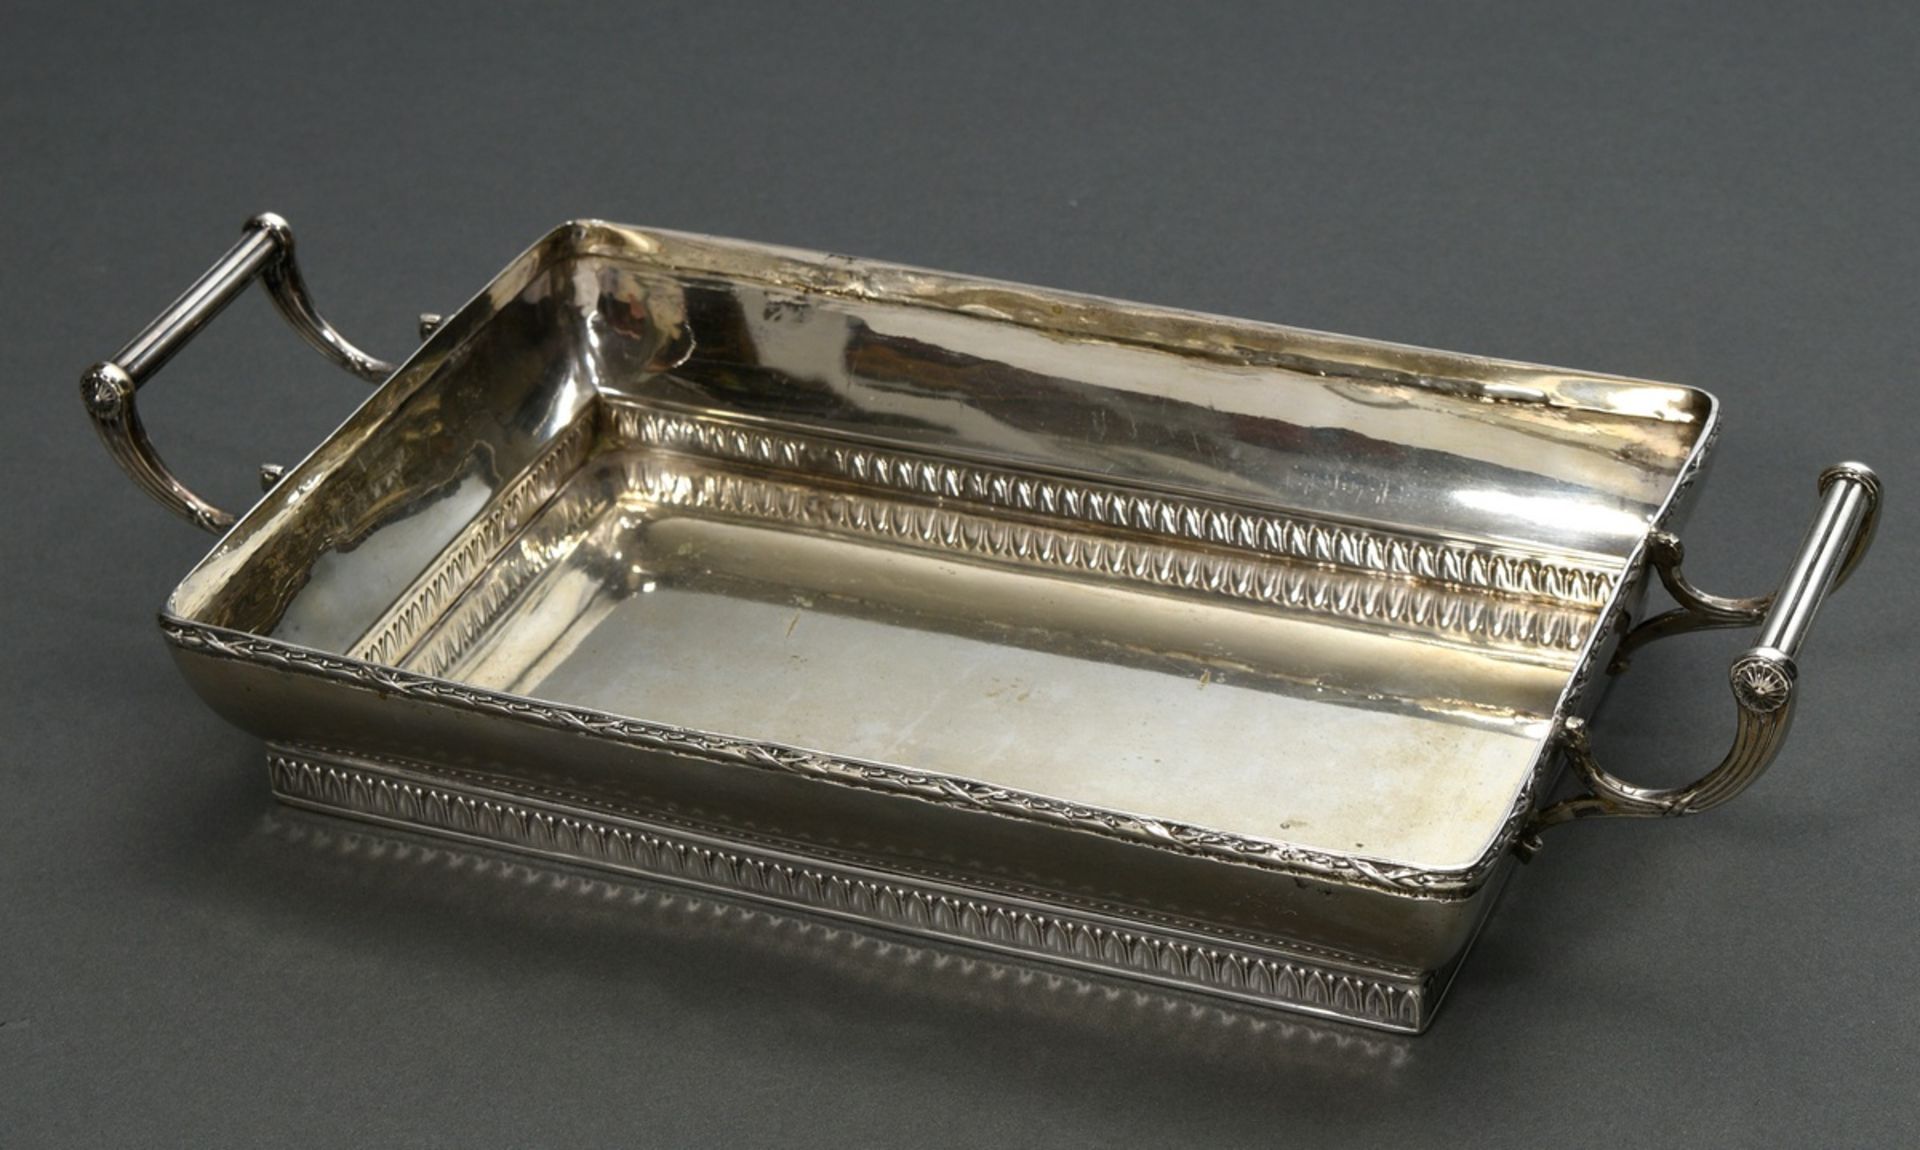 Rectangular bread basket with classical relief friezes and bow handles, Wilhelm Theodor Binder, c. 